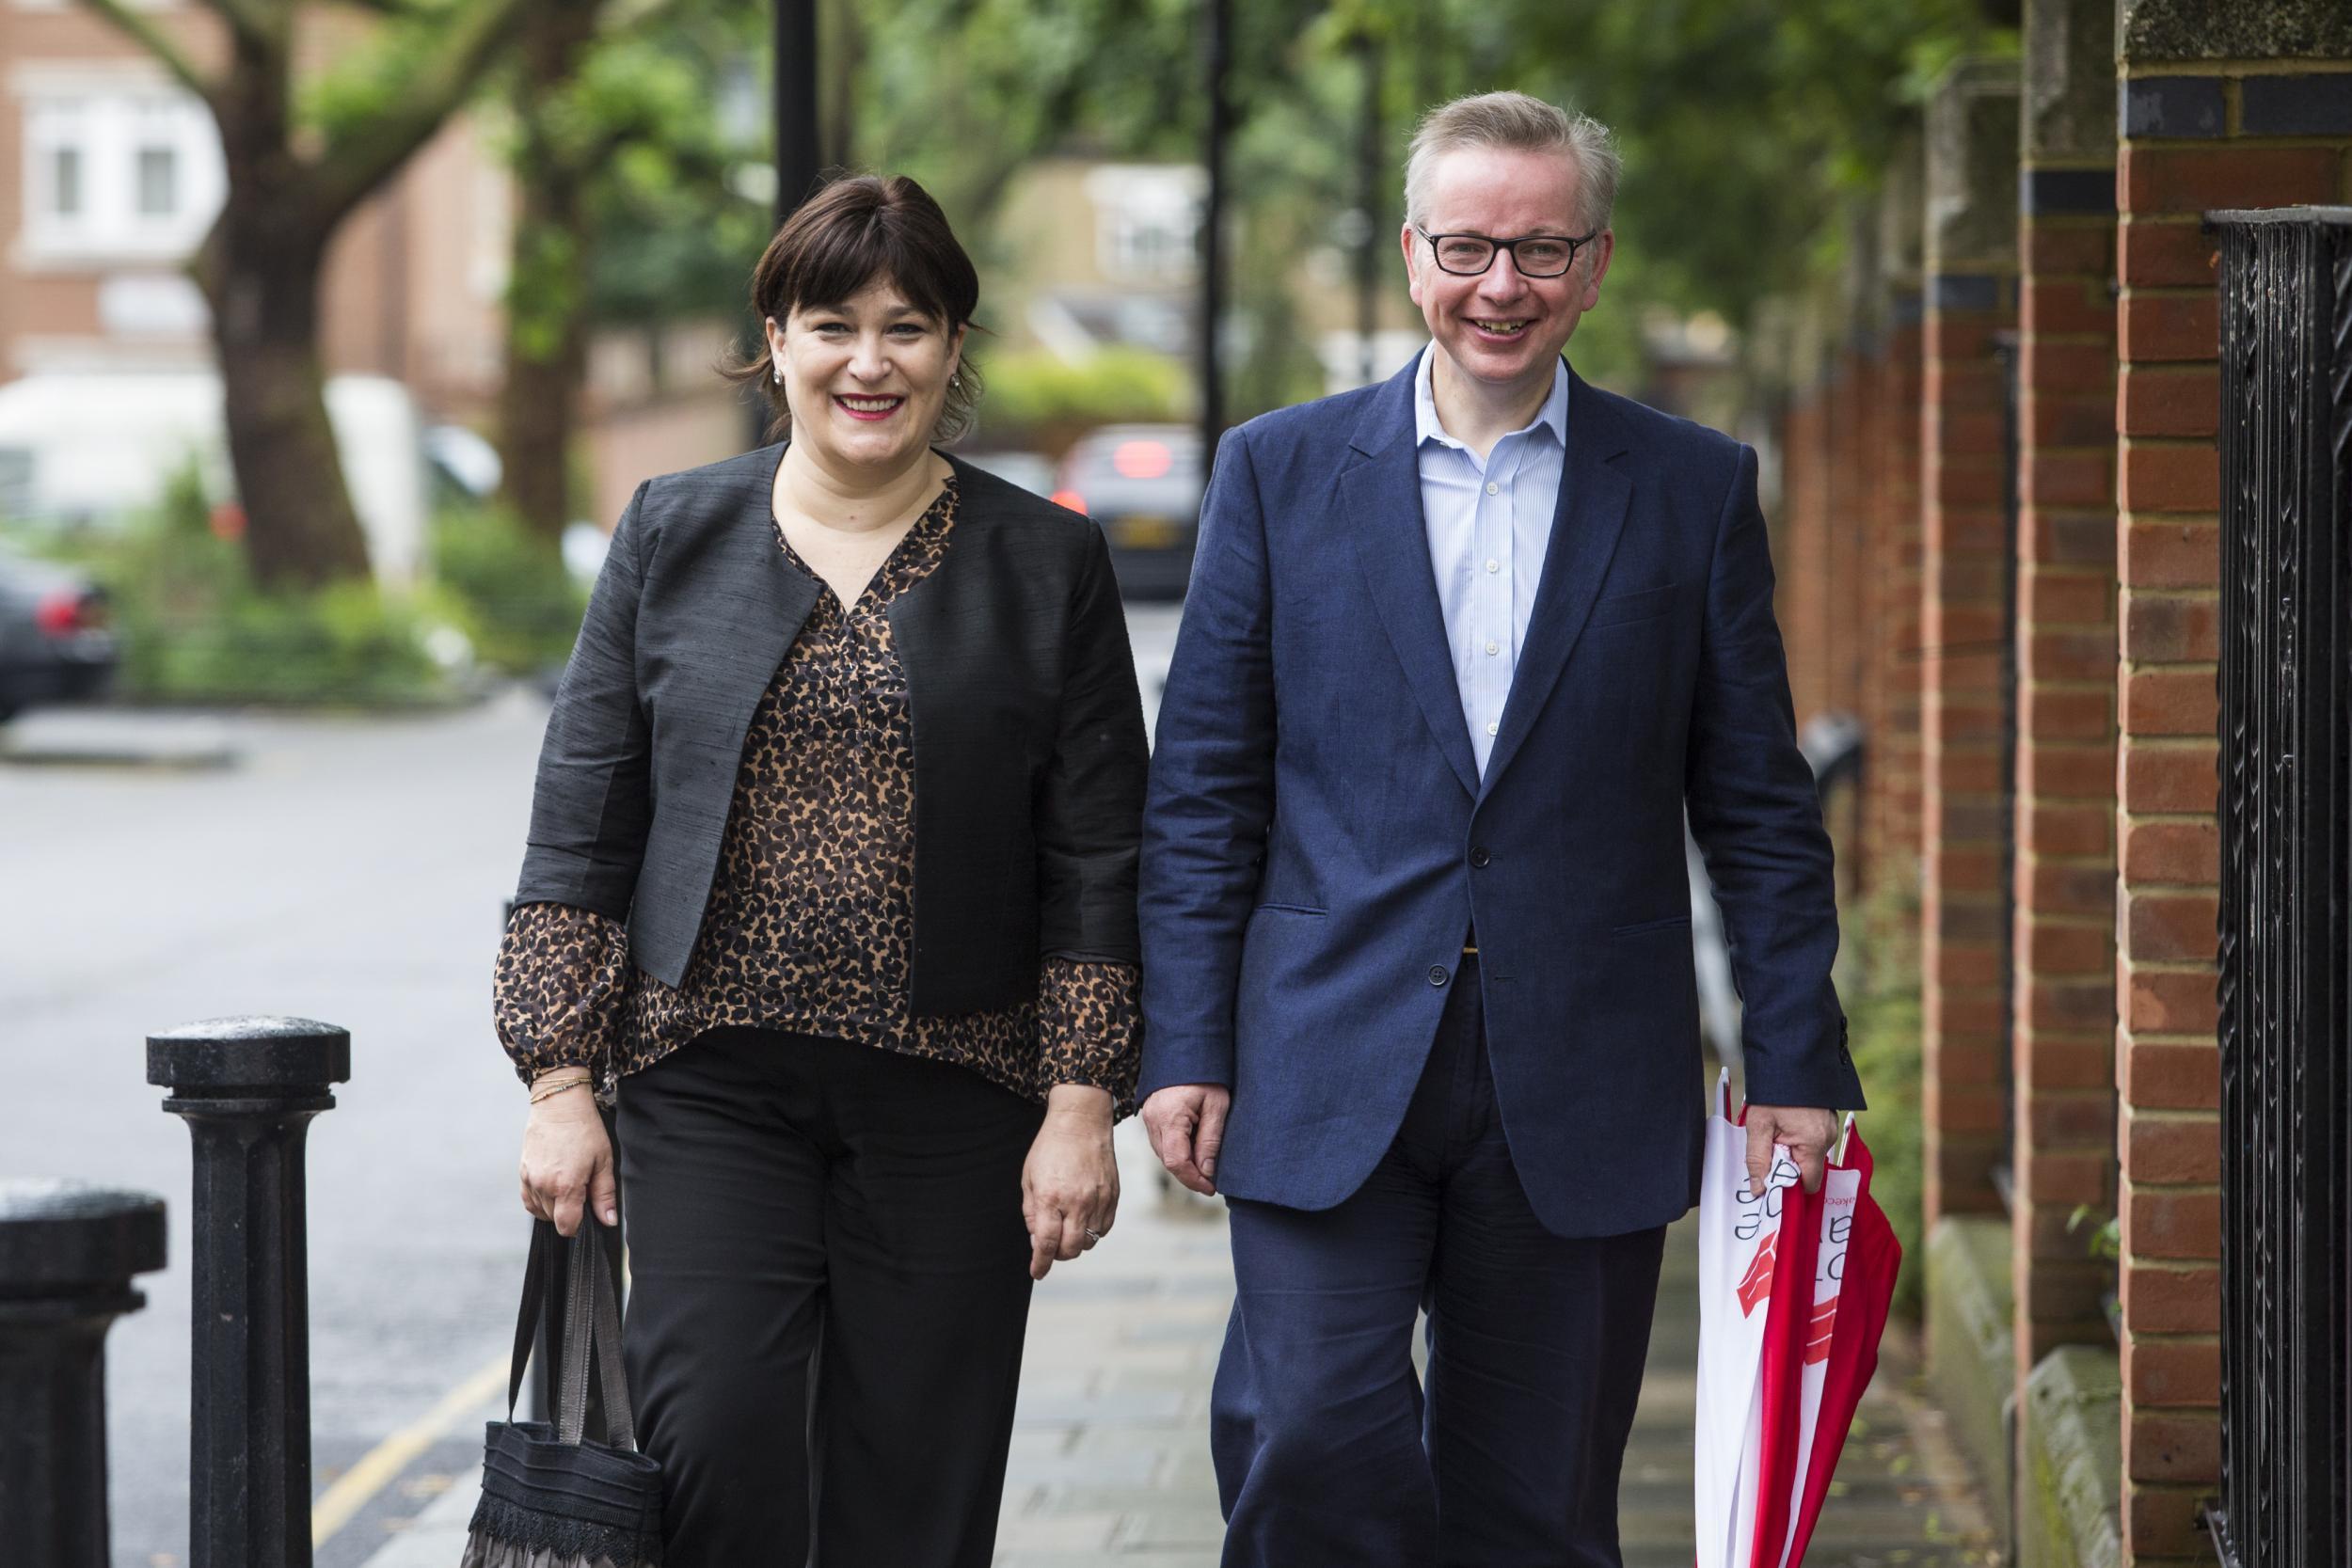 Mr Gove and his wife, Sarah Vine, said their son had said he would rather stay in and watch TV